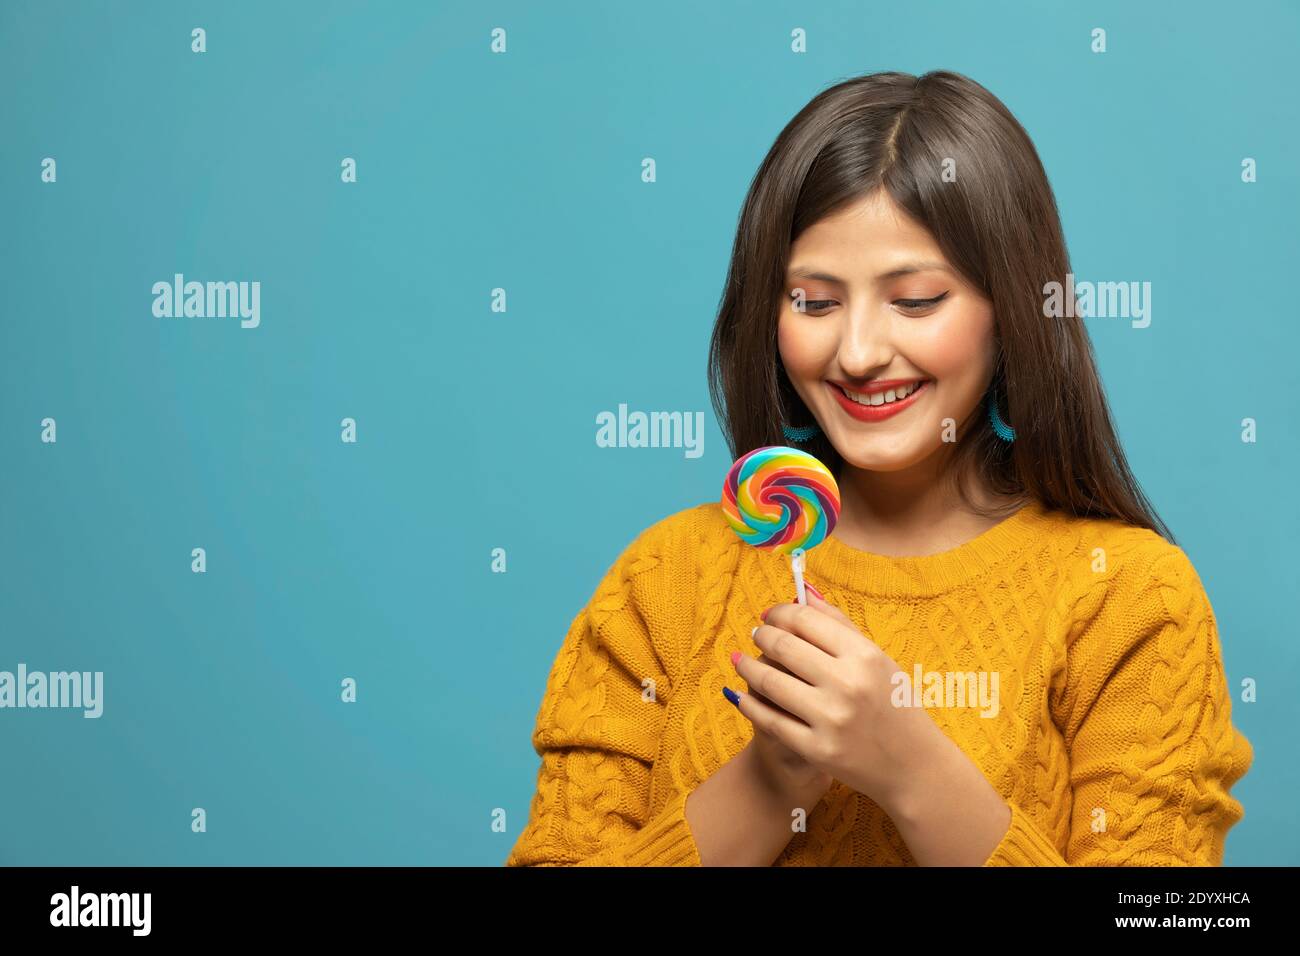 Portrait of a young woman holding a lollipop in hand Stock Photo